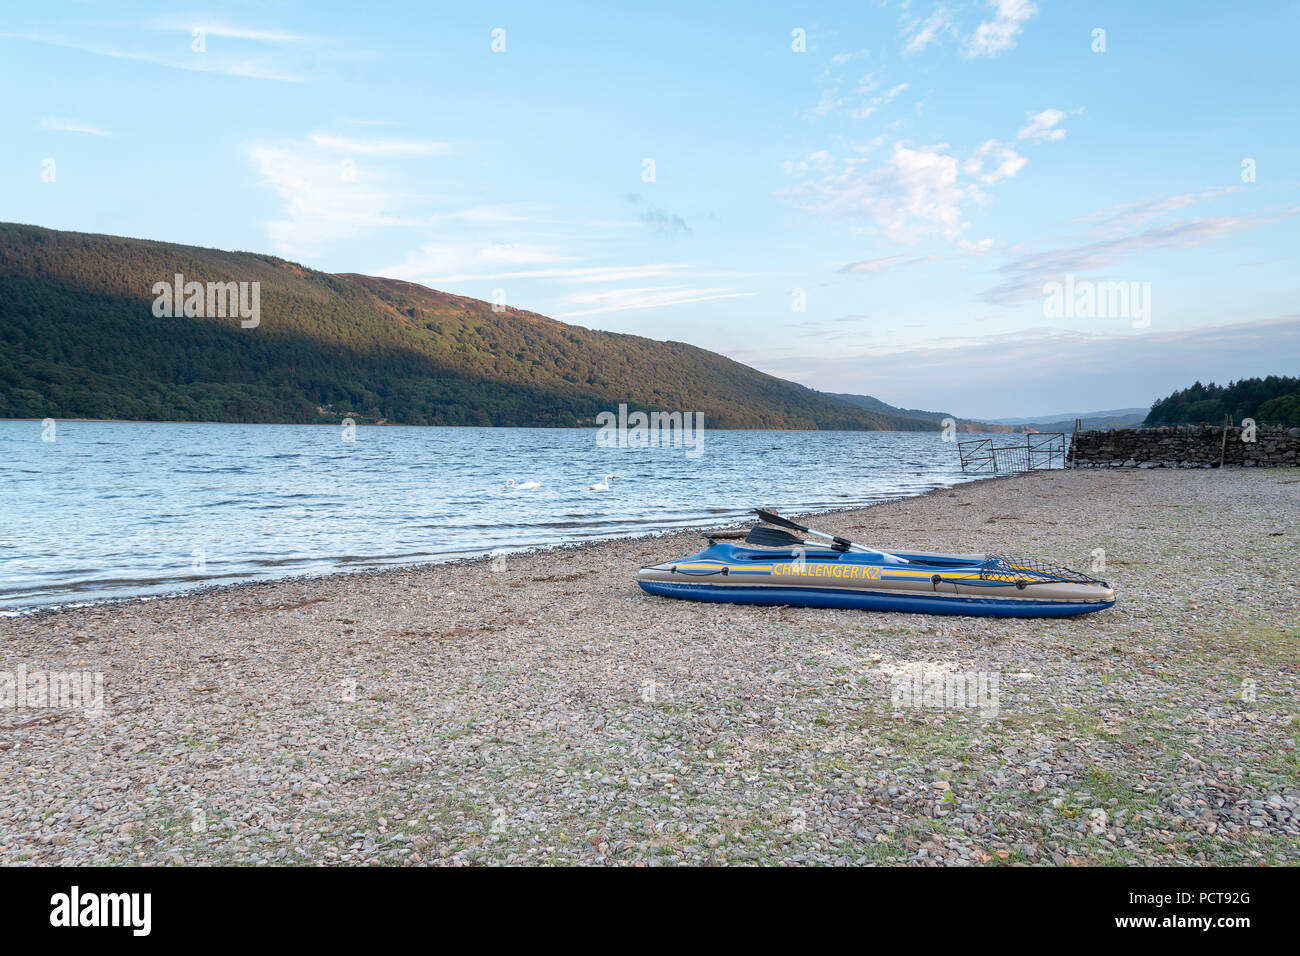 An image of an inflatable boat at the side of a lake, taken on a summer's evening at the Lake District, Cumbria, England, UK Stock Photo